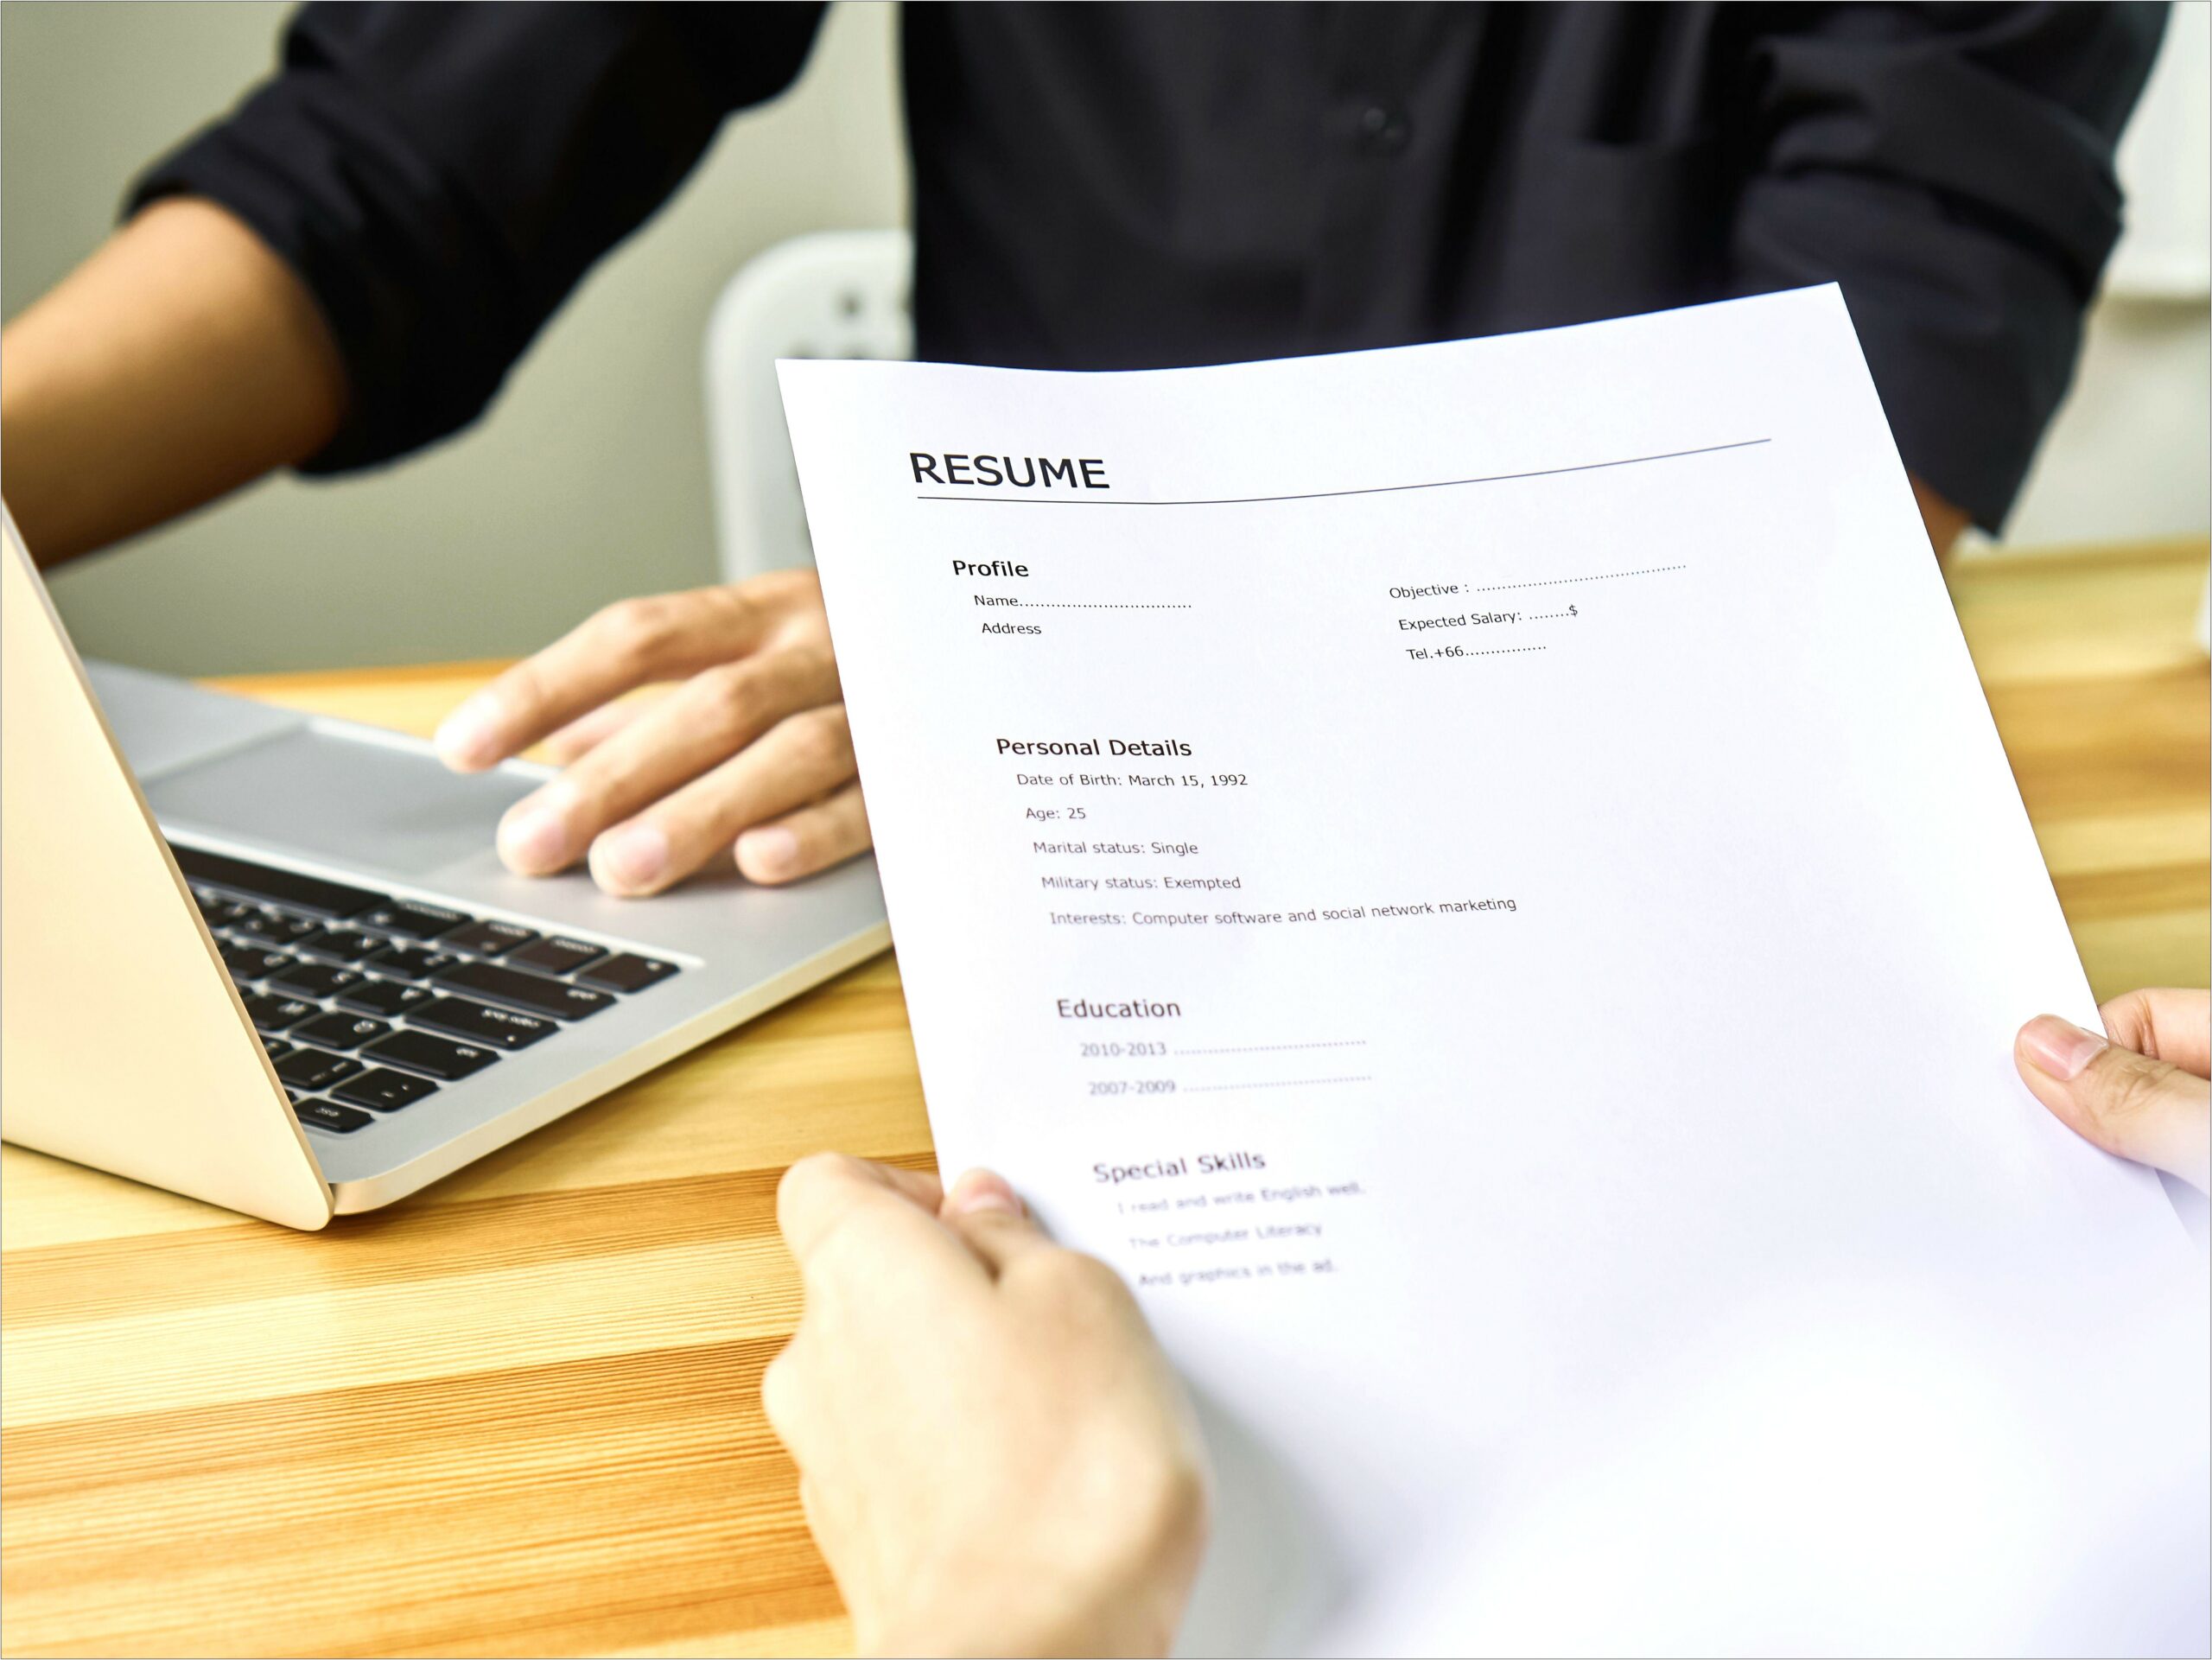 Should Your Resume Fit On Legal Or Letter